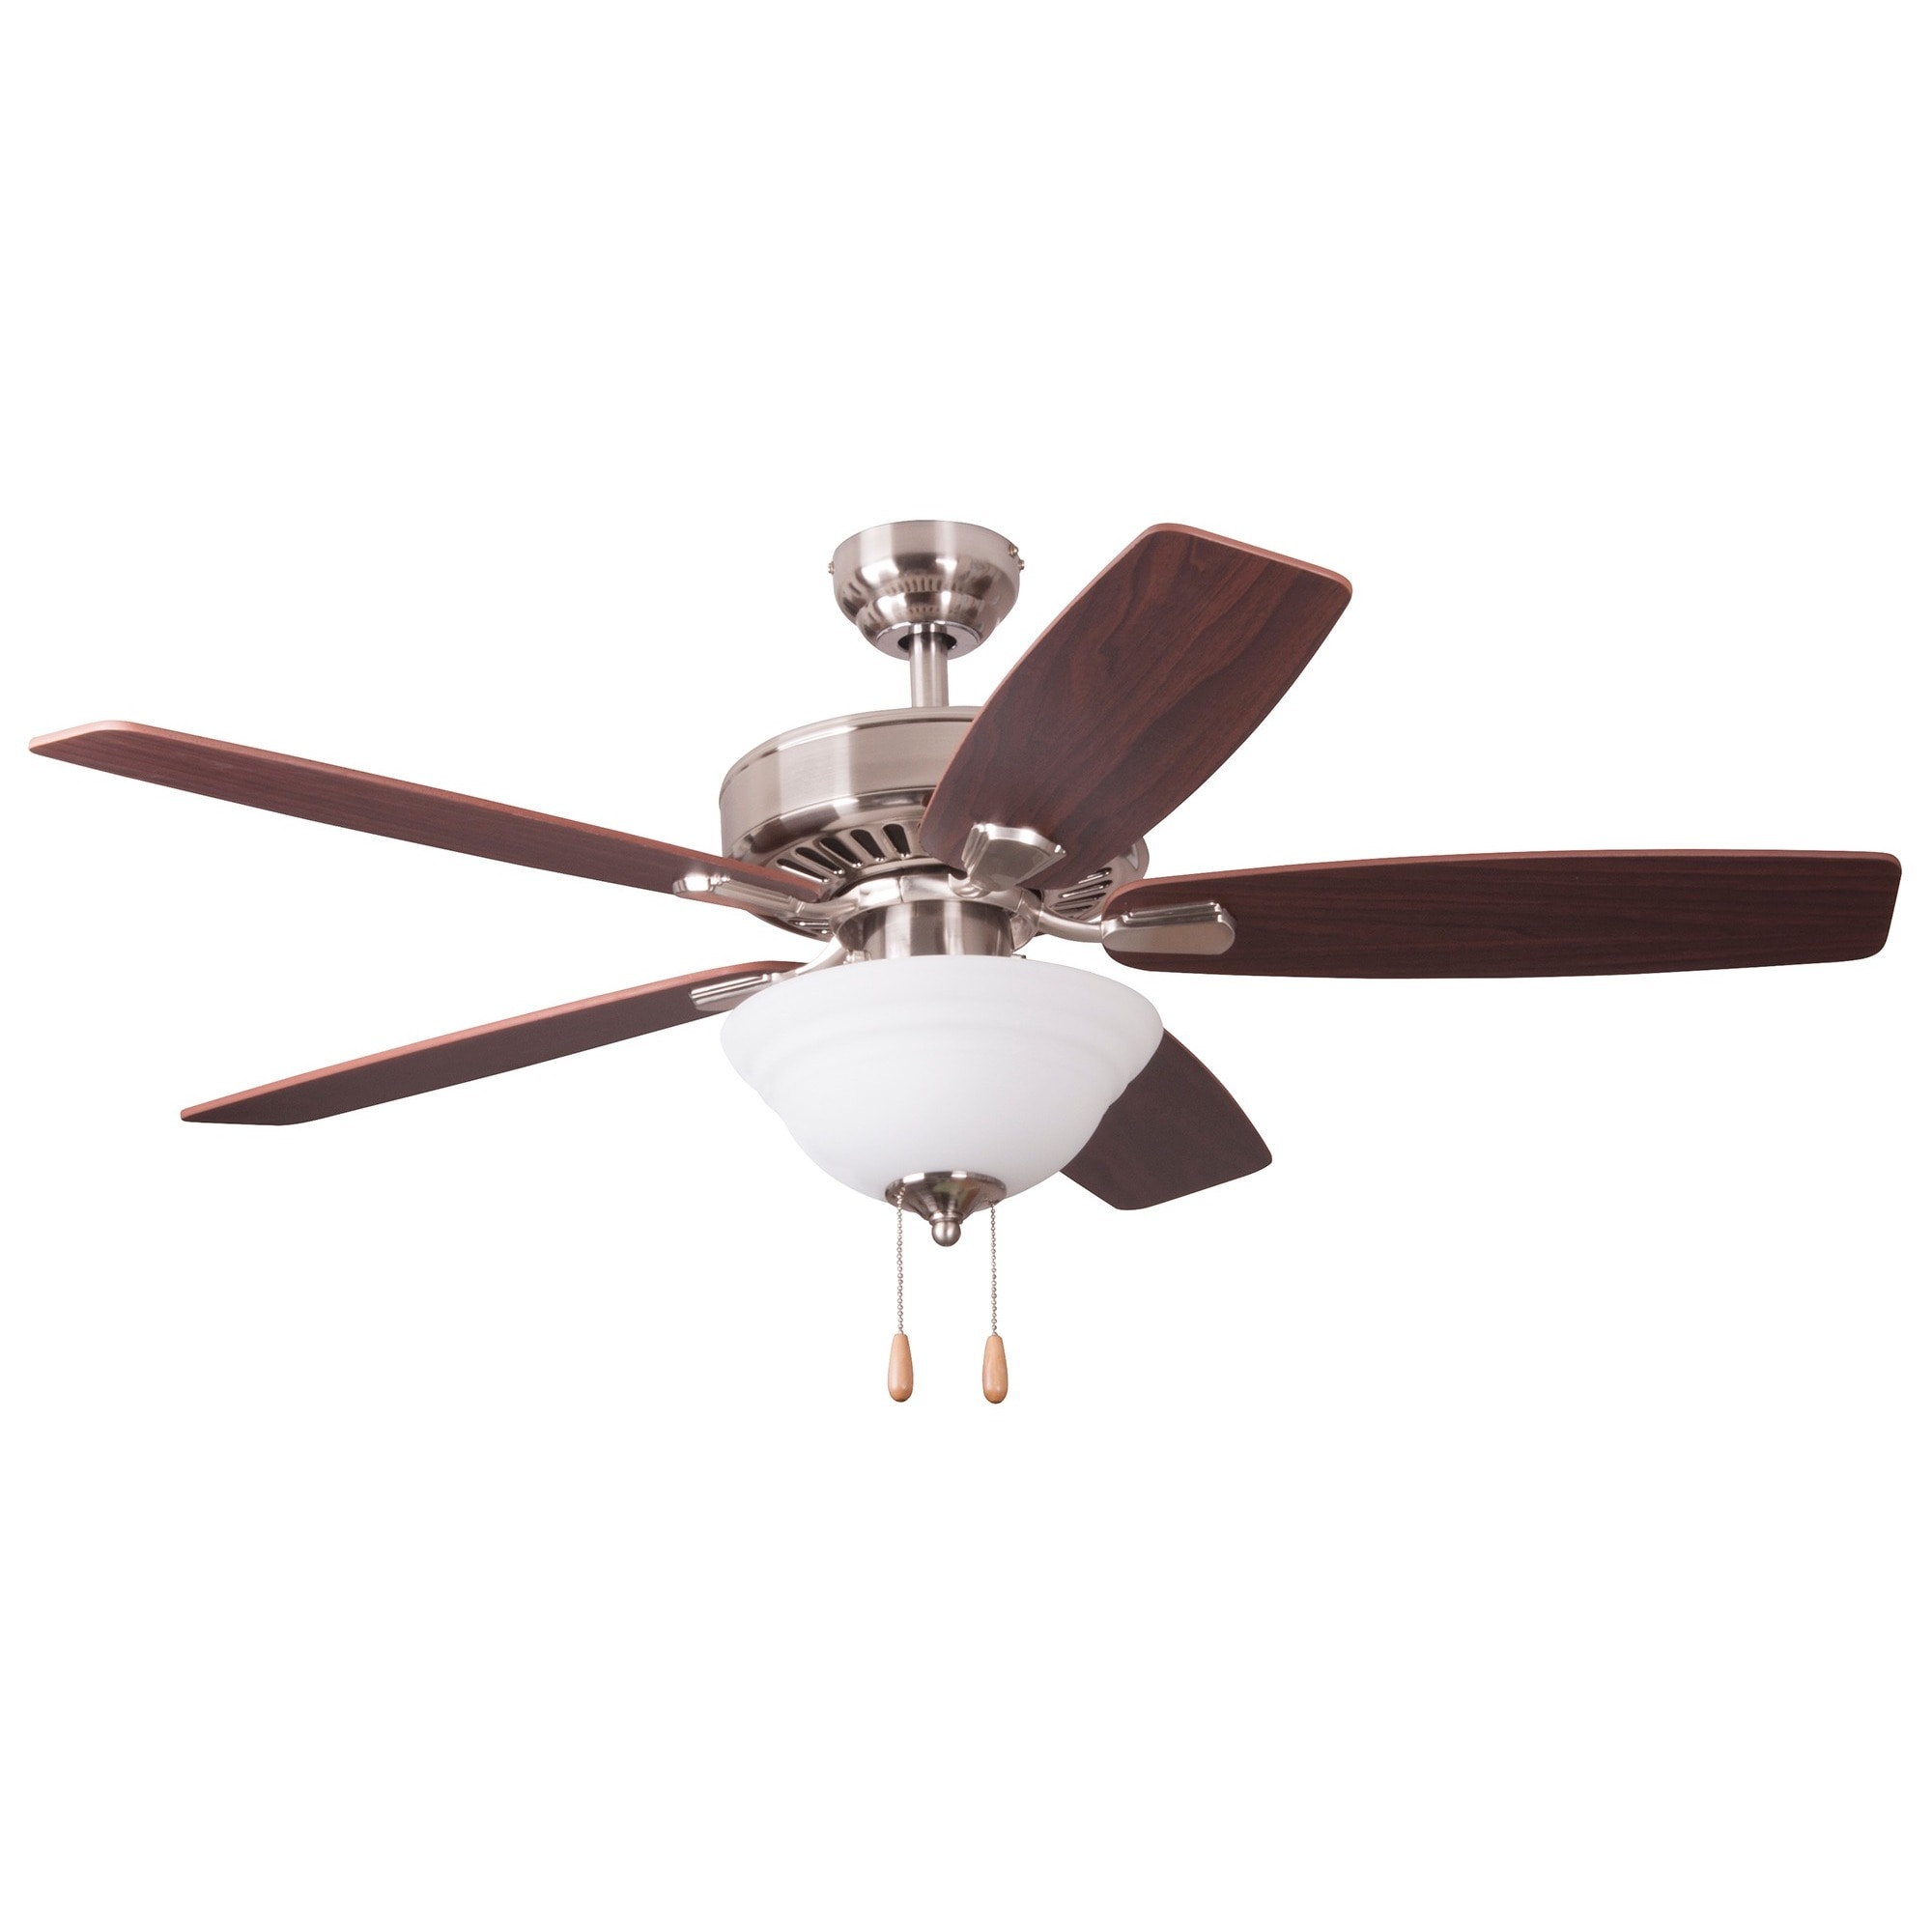 Copper Grove Chortkiv 52 Inch Brushed Nickel Ceiling Fan With Remote Control